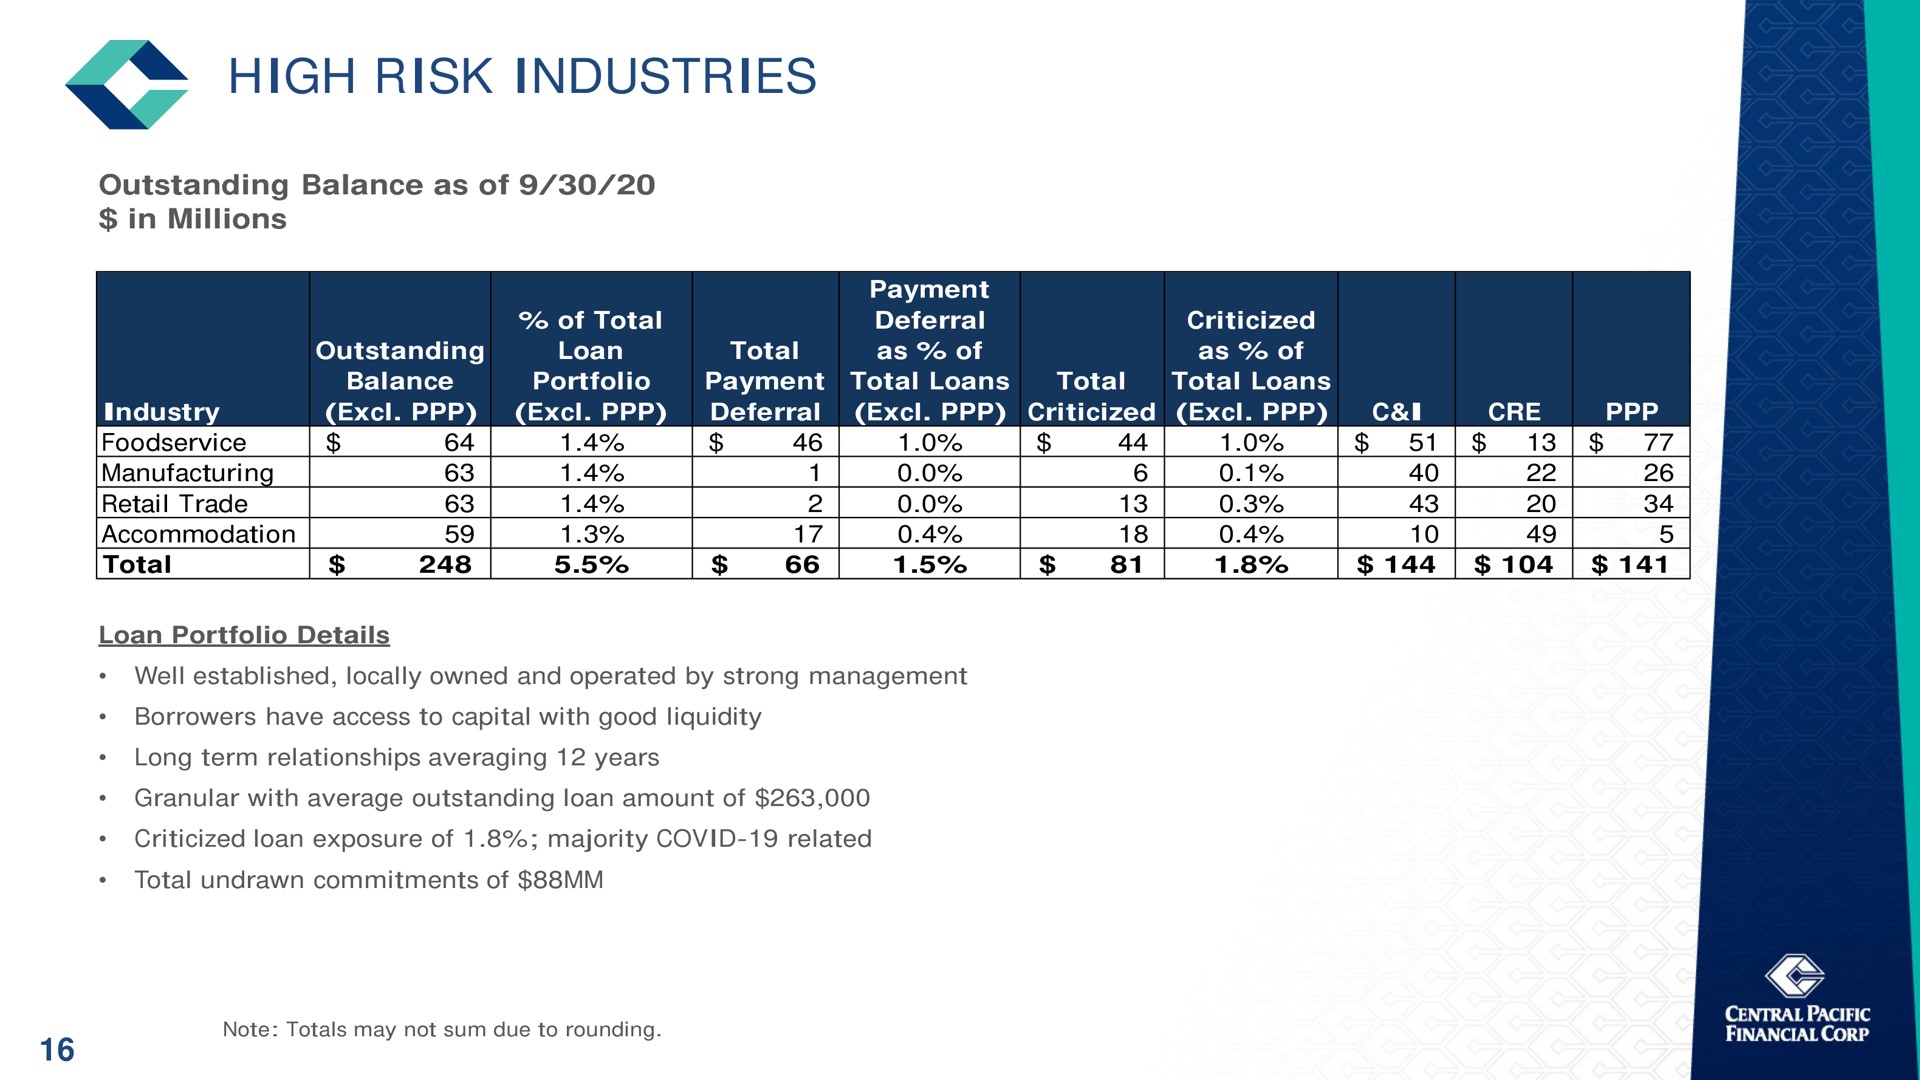 high risk industries | Central Pacific Financial